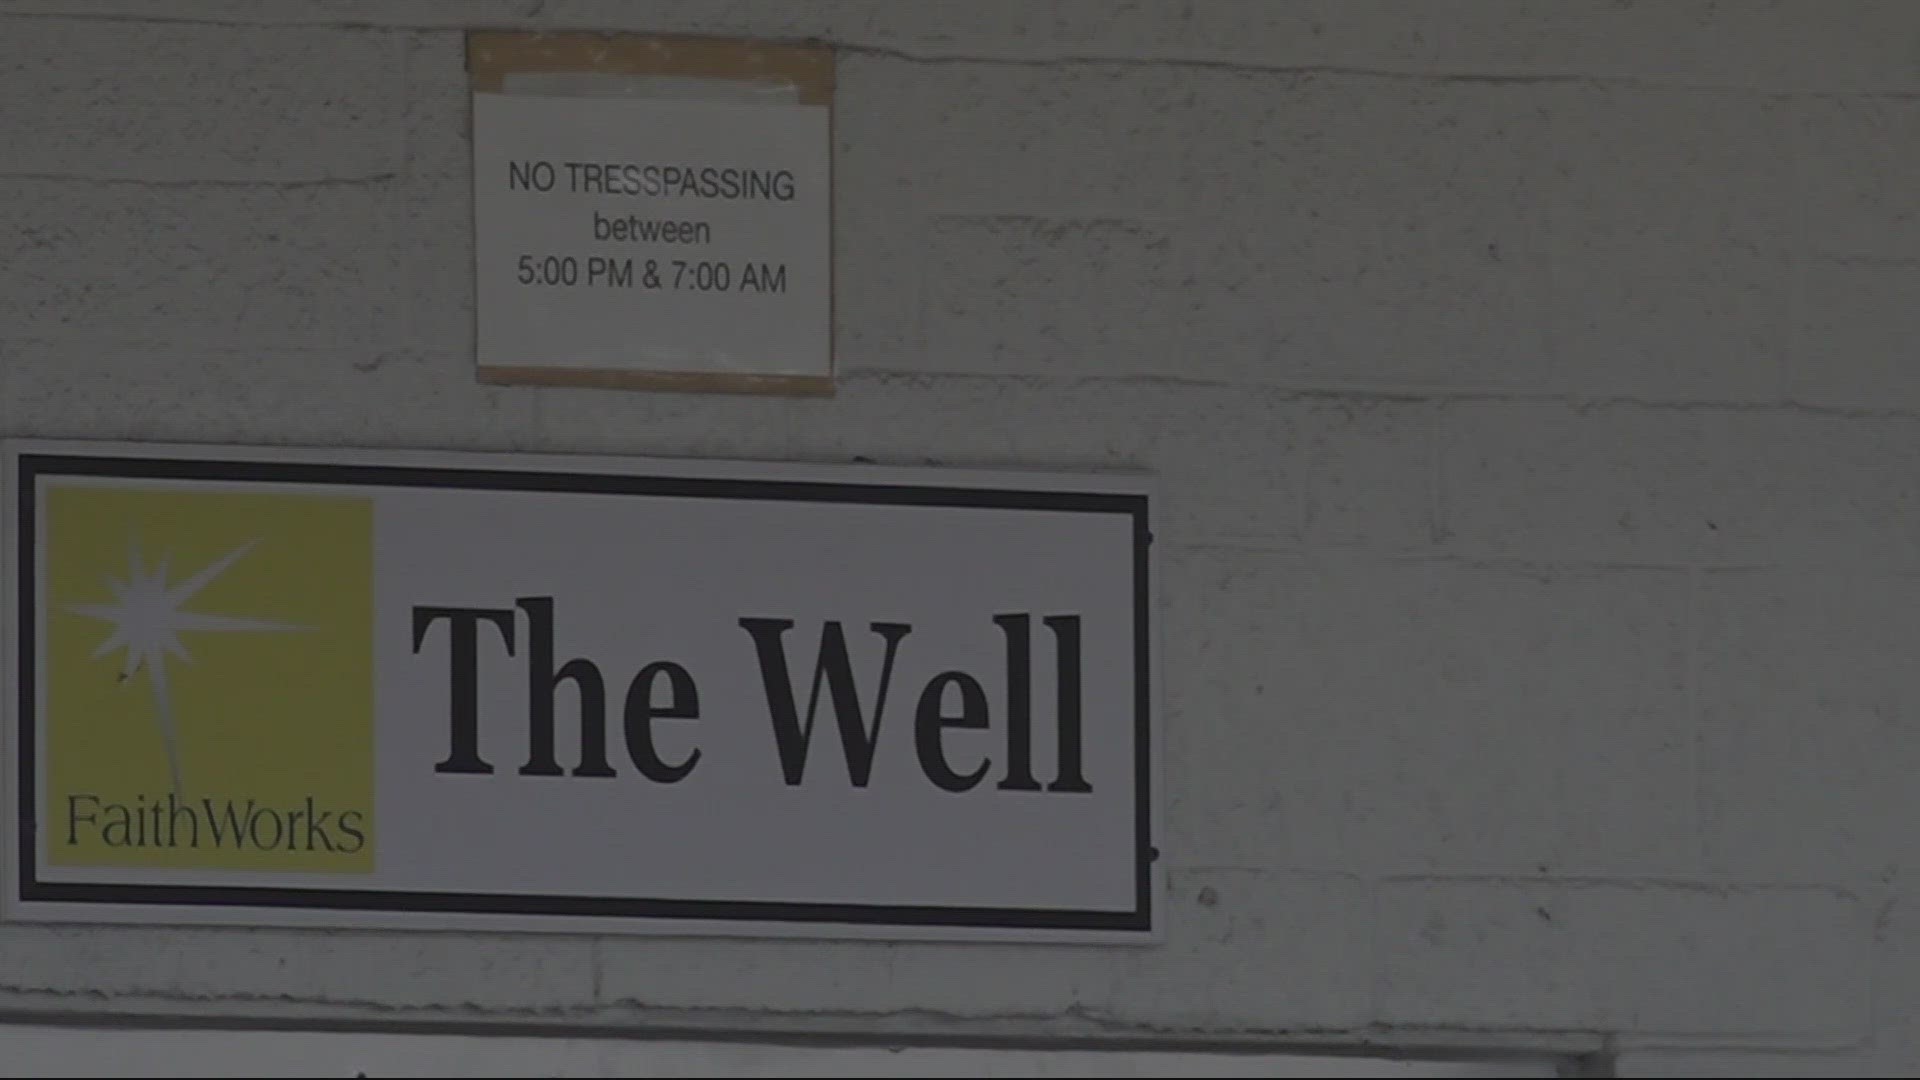 The Well is a homeless shelter in Glynn County.